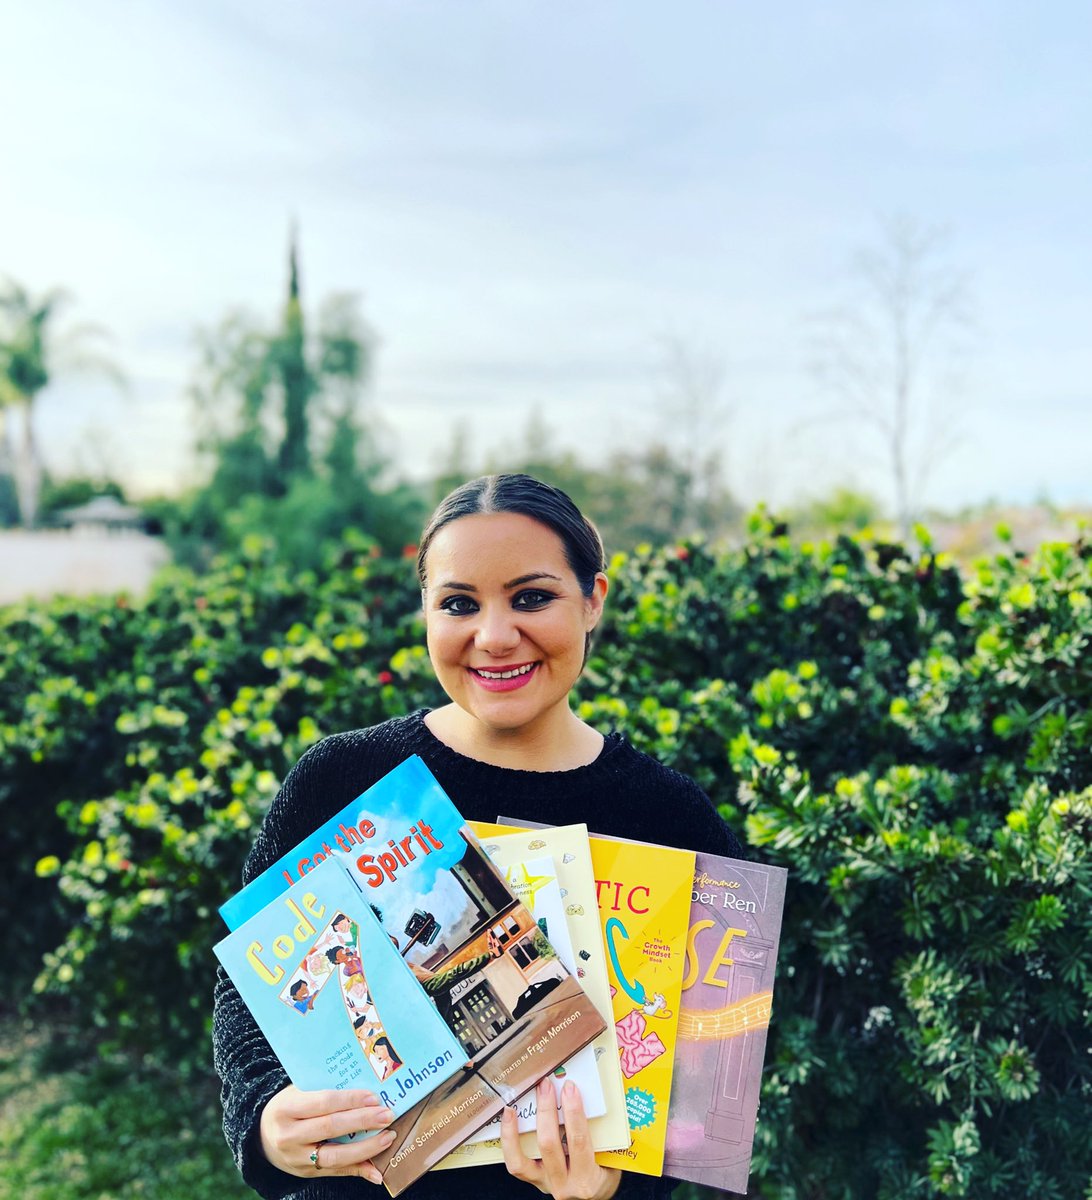 Thank you @CapitalOne and @HarperforKids for gifting my classroom with 6 brand new beautiful books! 

I cannot wait for my Scholars to continue in their journey to defining what it means to be their “Personal Best!” Thank you, thank you, thank you!